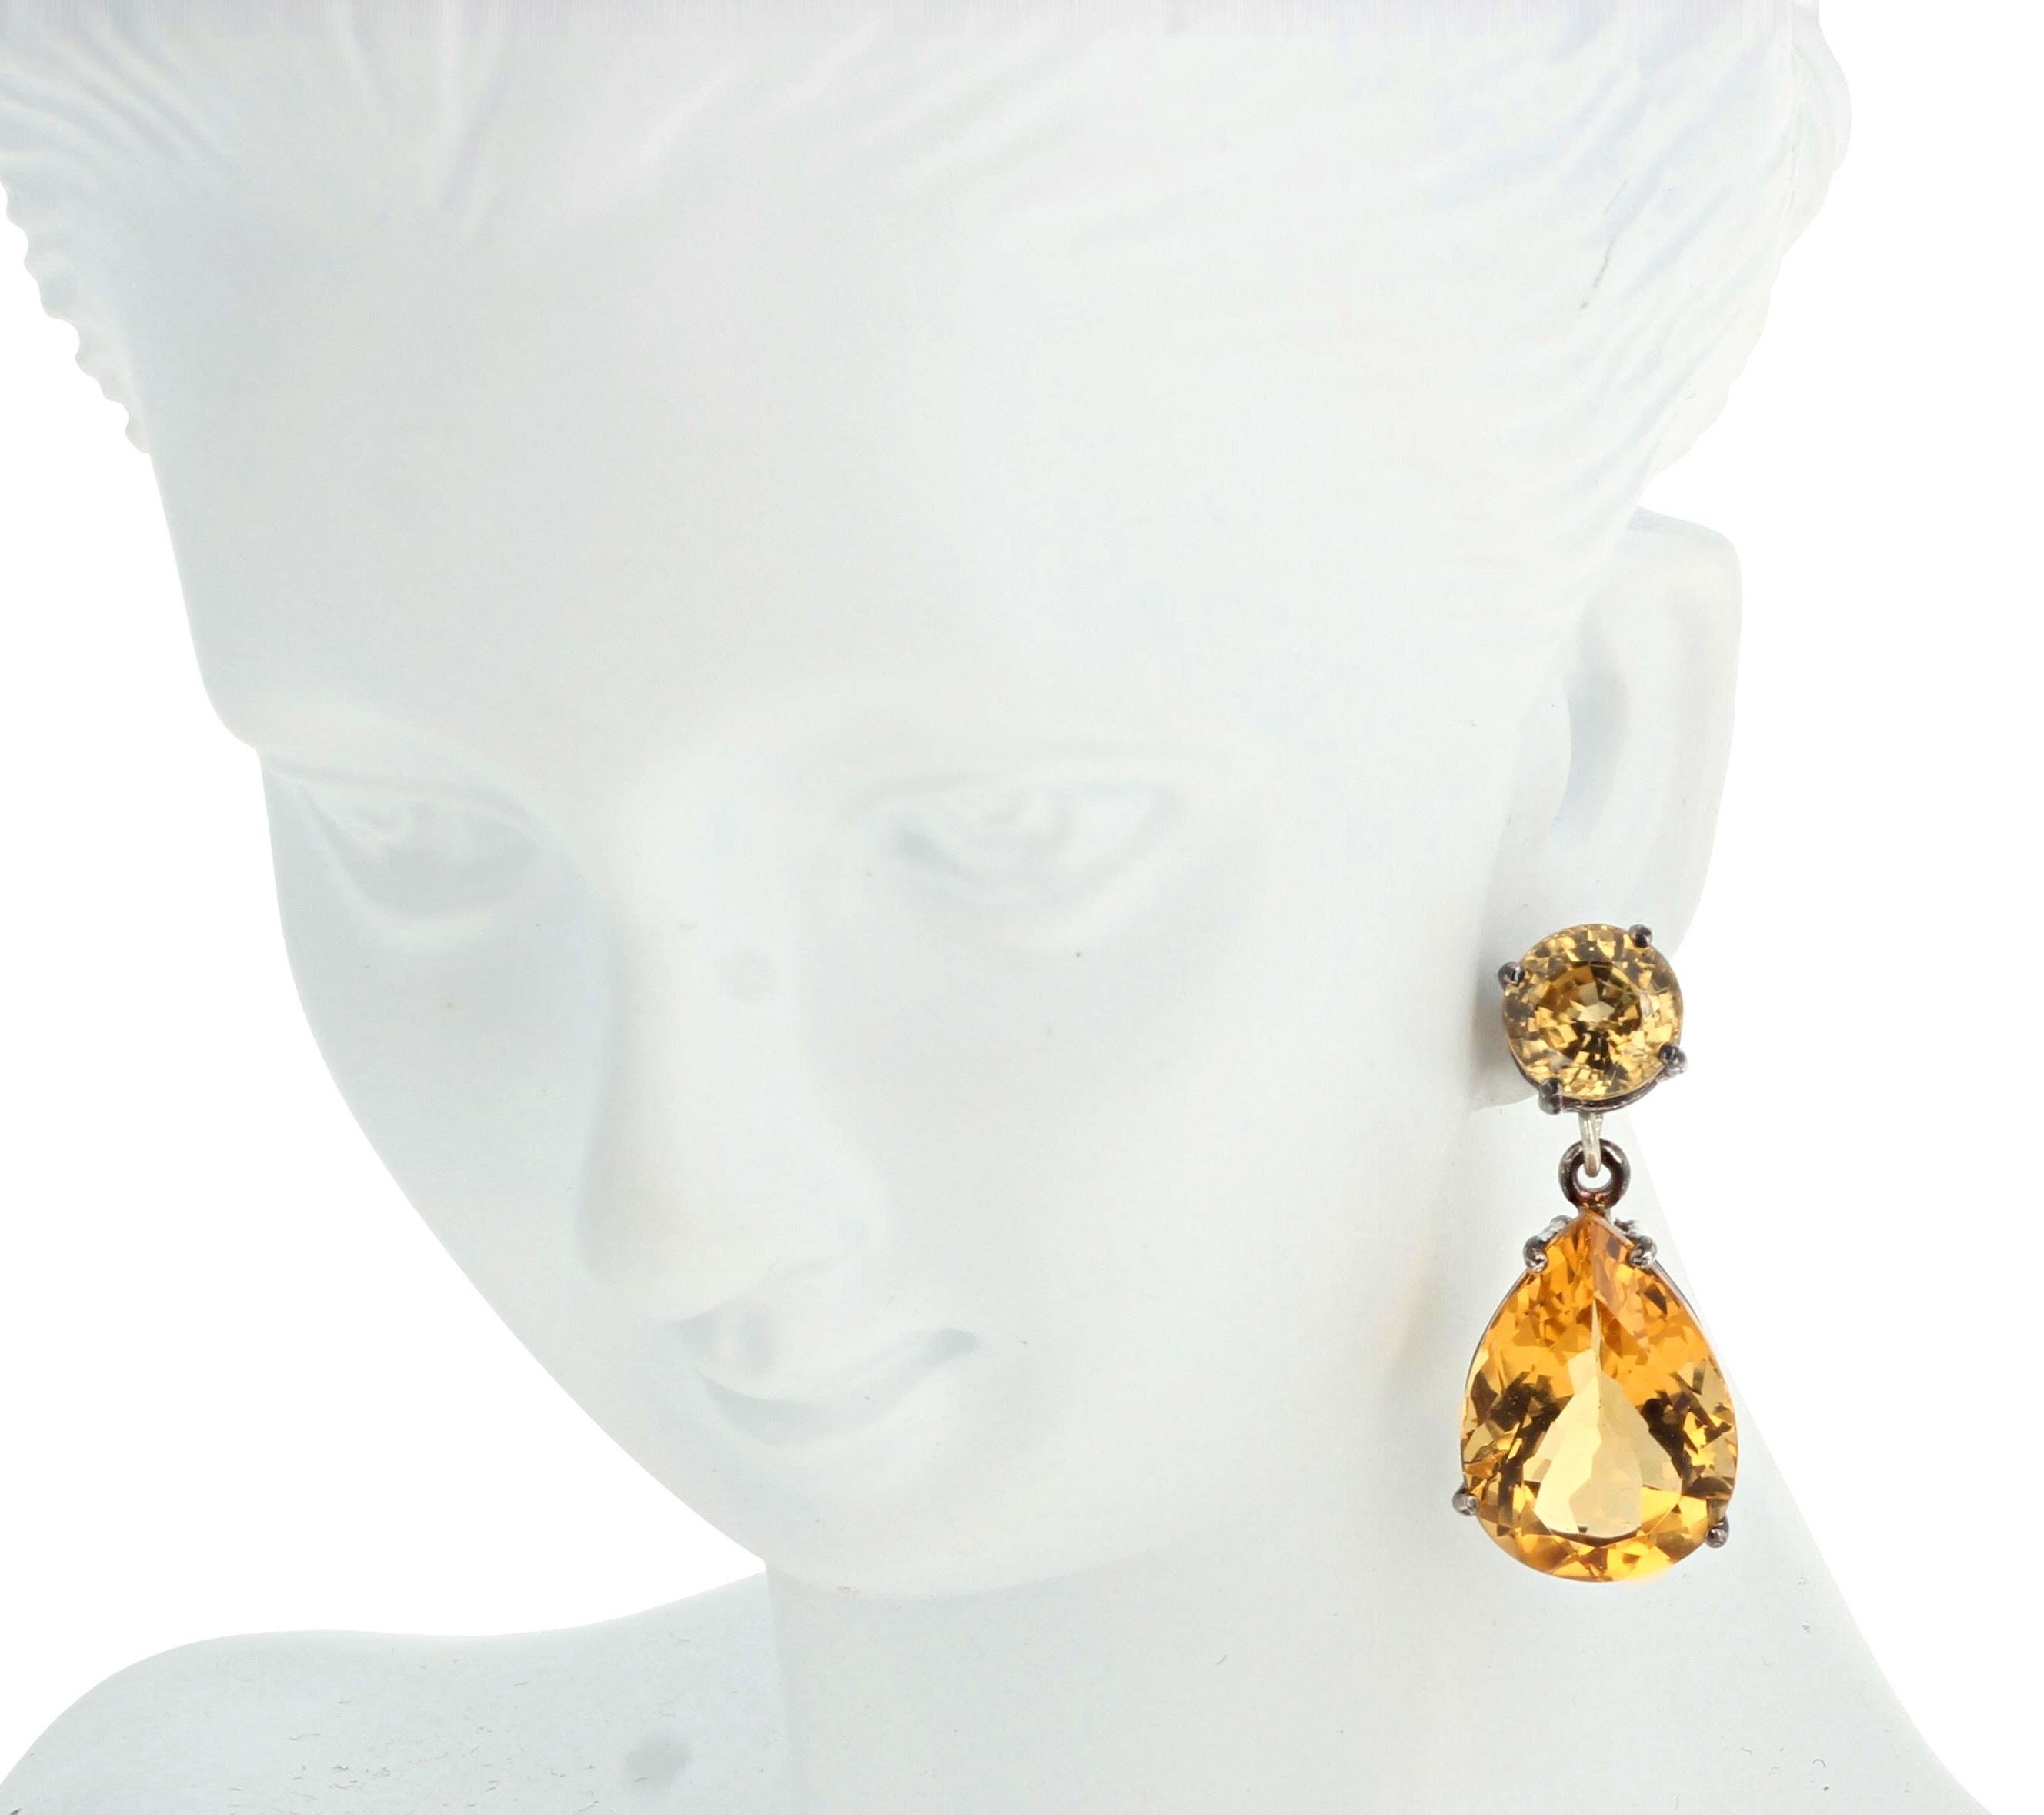 These amazingly glittery natural very rare round Yellow Zircons total 5.35 carats (6.8mm).  The brilliant goldy yellow natural Citrines total 16.4 carats (17mm x 12mm).  They are set in easy to use sterling silver stud earrings.  There are no eye